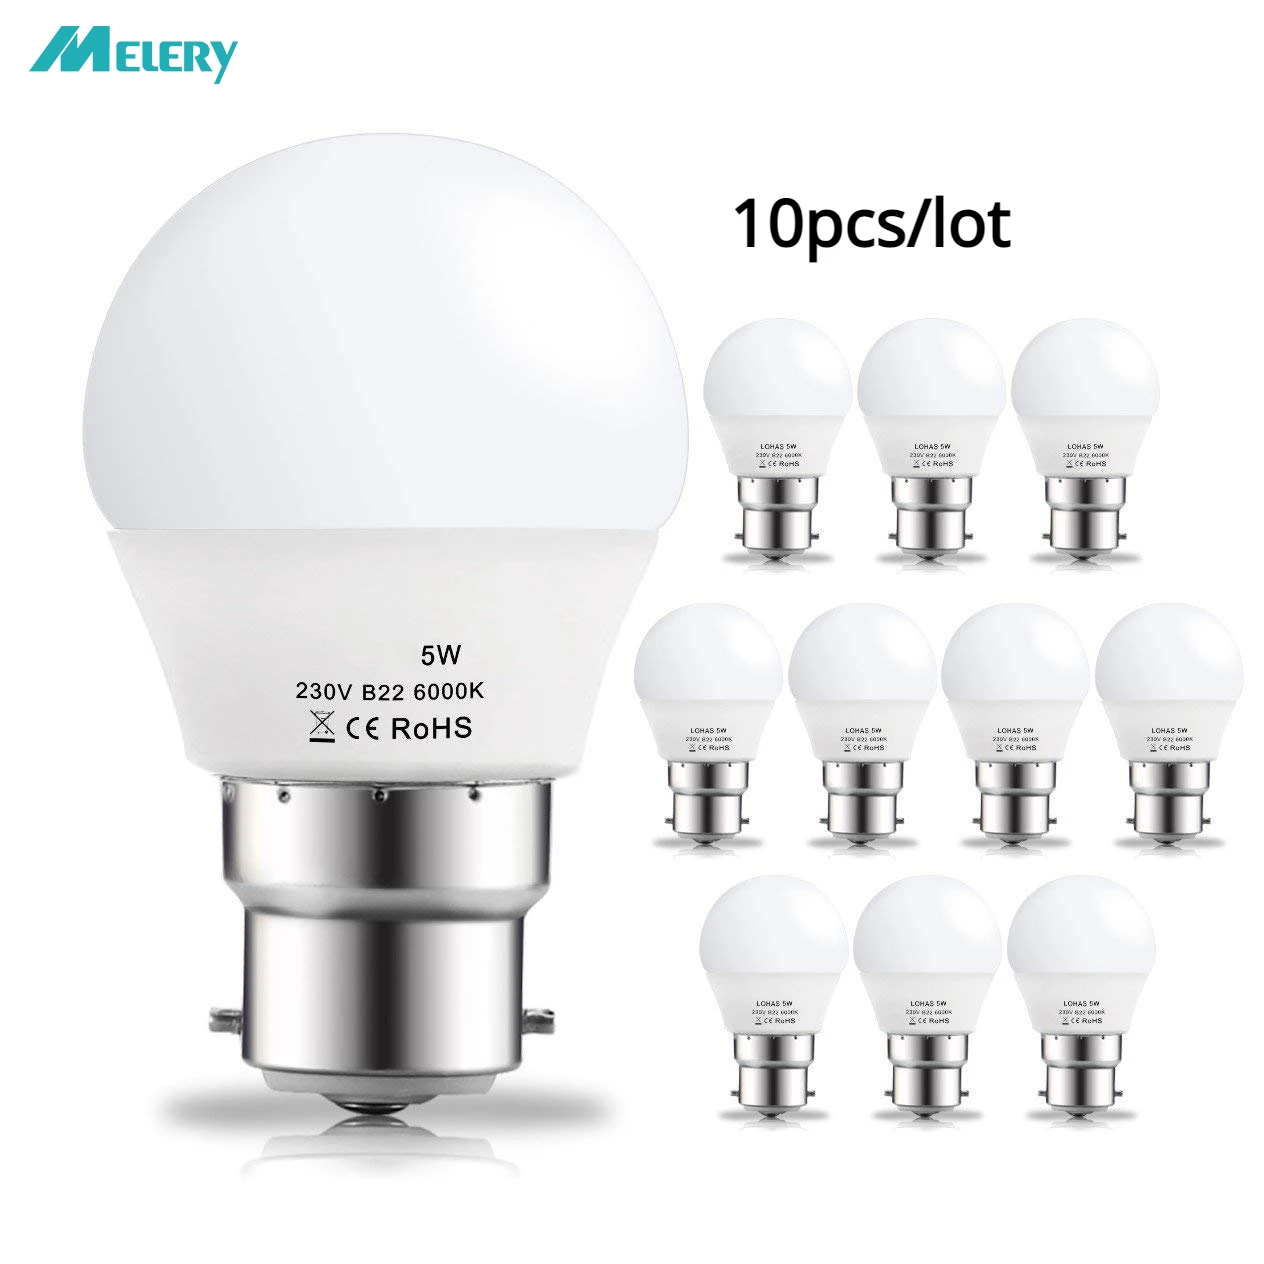 B22 LED Light Bulb G45 5W Lamp Day White 6000K 400lm Bayonet Base 35W Incandescent Bulbs Equivalent Class A+] 10Pack